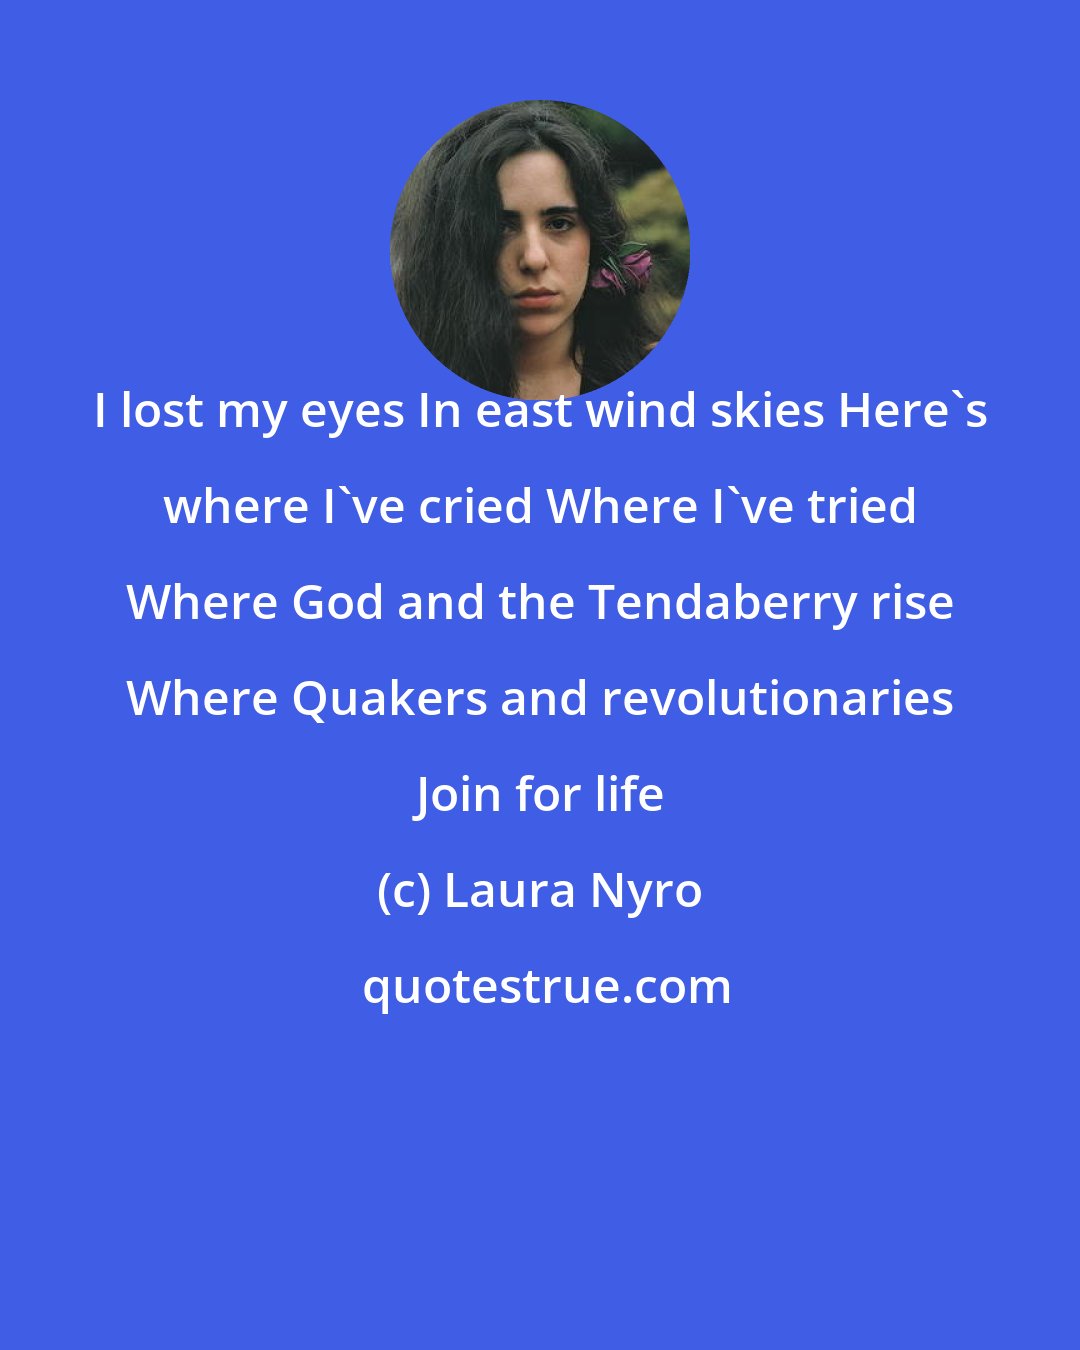 Laura Nyro: I lost my eyes In east wind skies Here's where I've cried Where I've tried Where God and the Tendaberry rise Where Quakers and revolutionaries Join for life